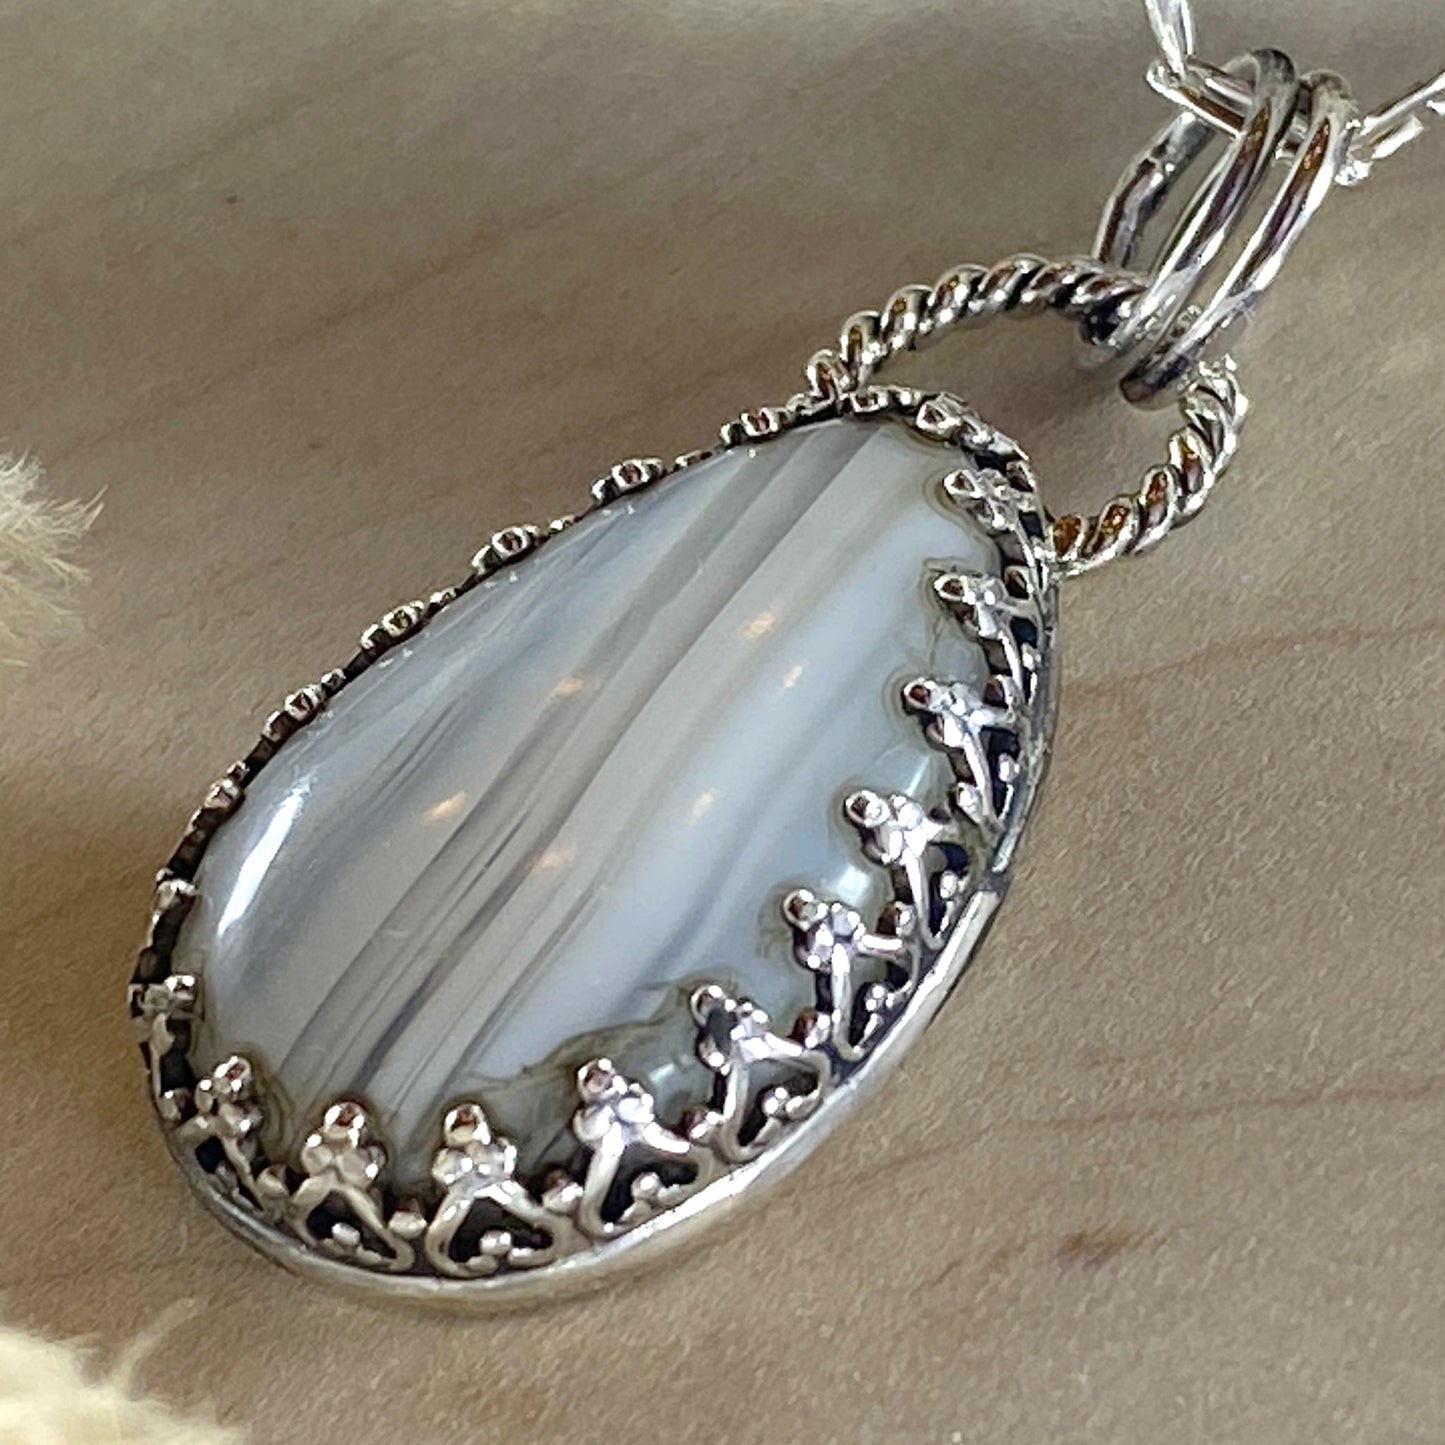 Beaver Rim Agate Pendant Necklace - Stone Treasures by the Lake